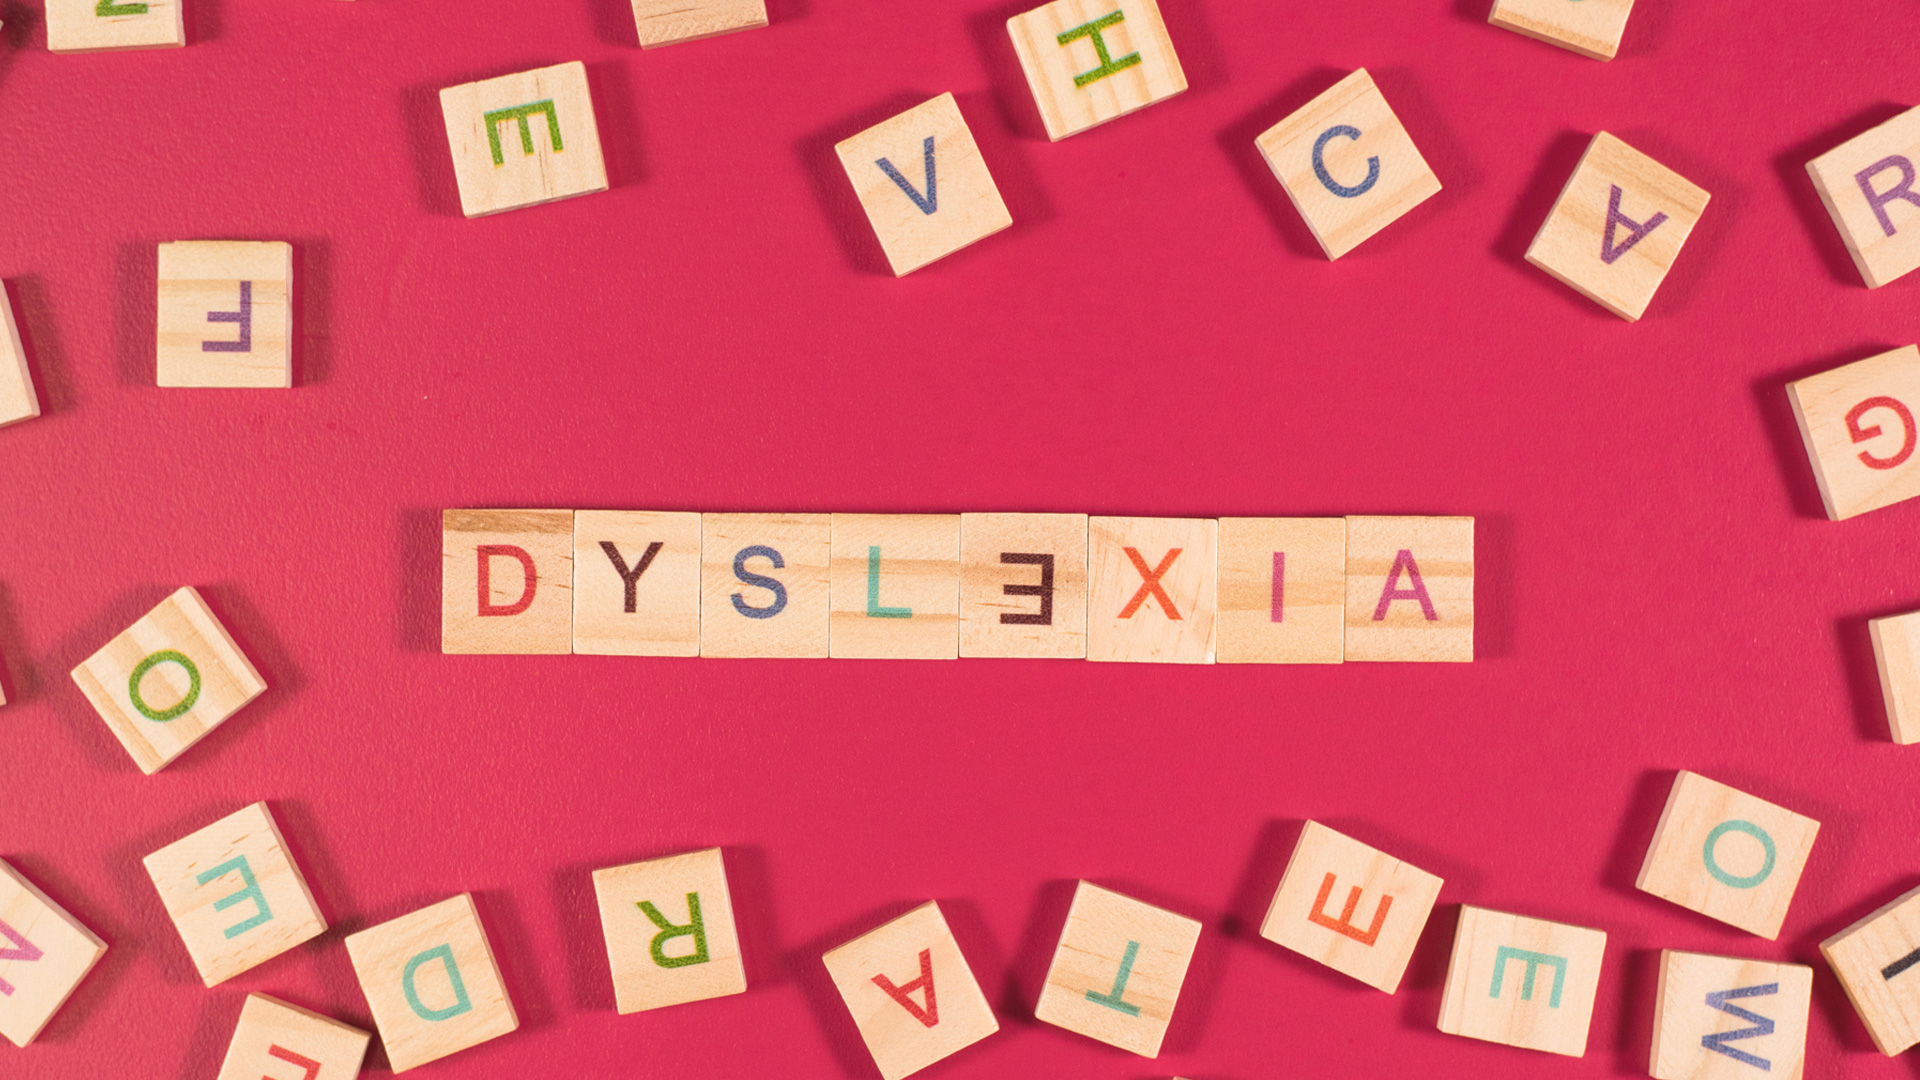 Developmental dyslexia: Neurocognitive theories and challenges for educators